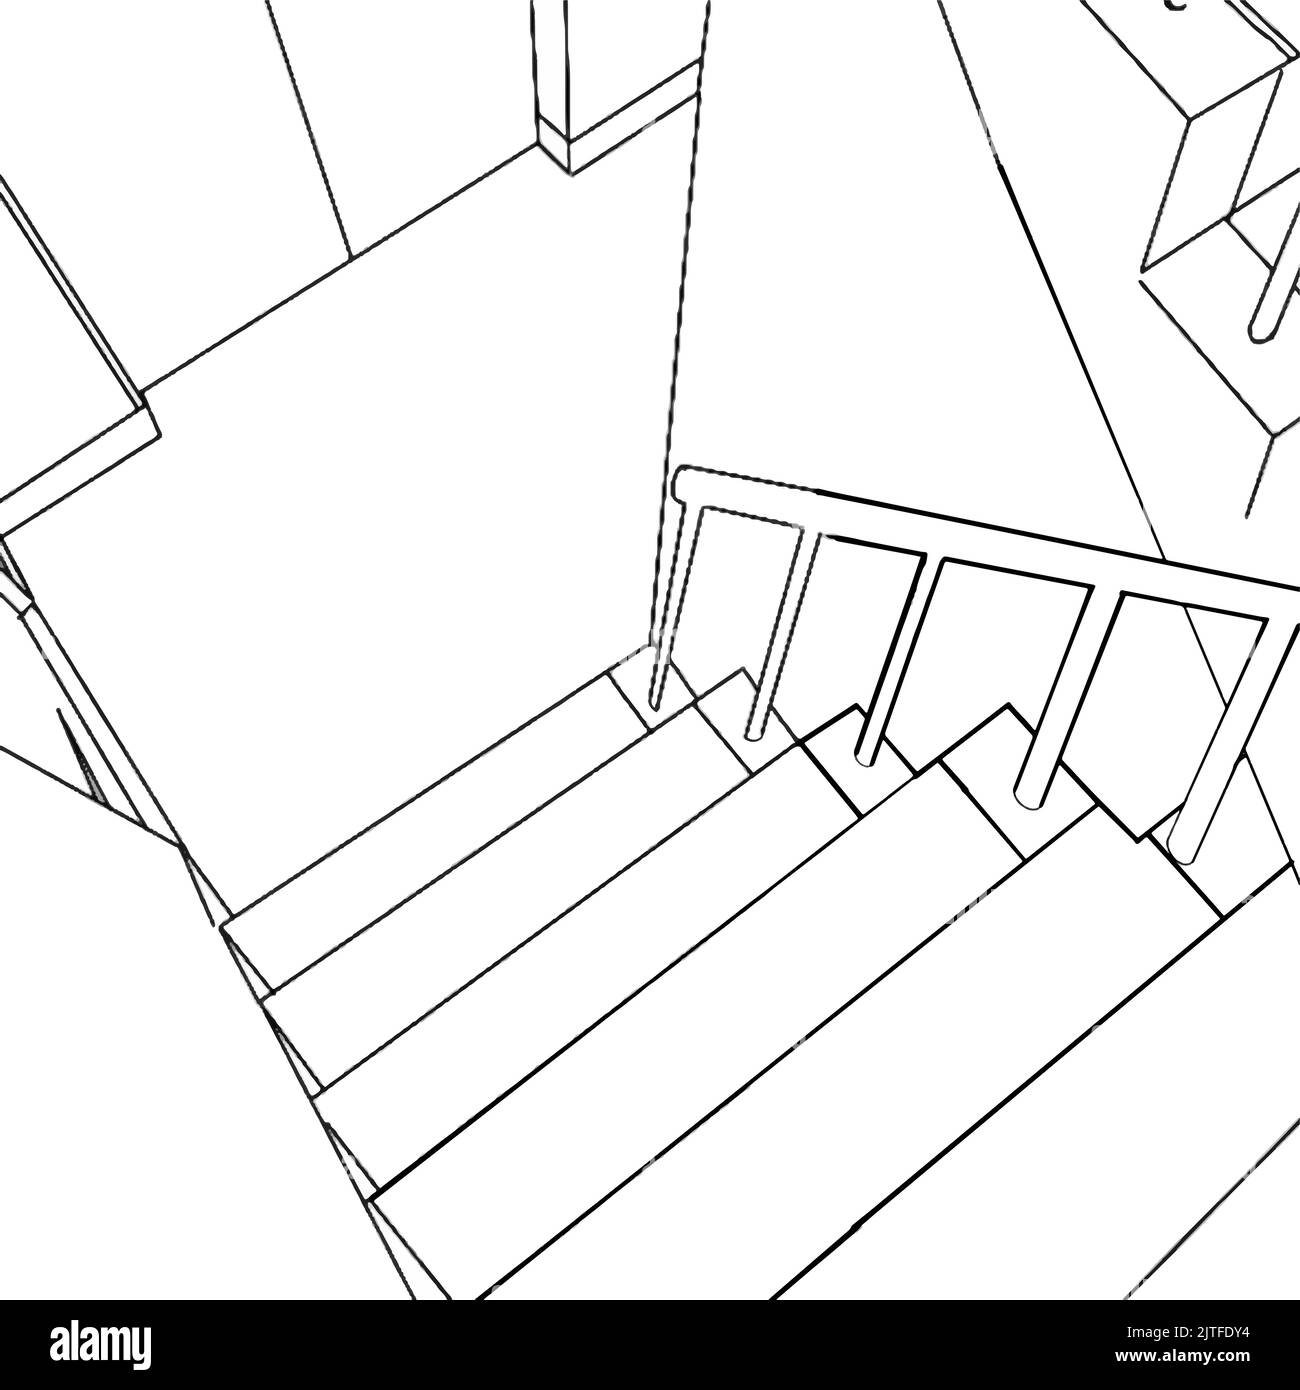 Pencil-drawn room with stairs leading down in a vector illustration Stock Vector